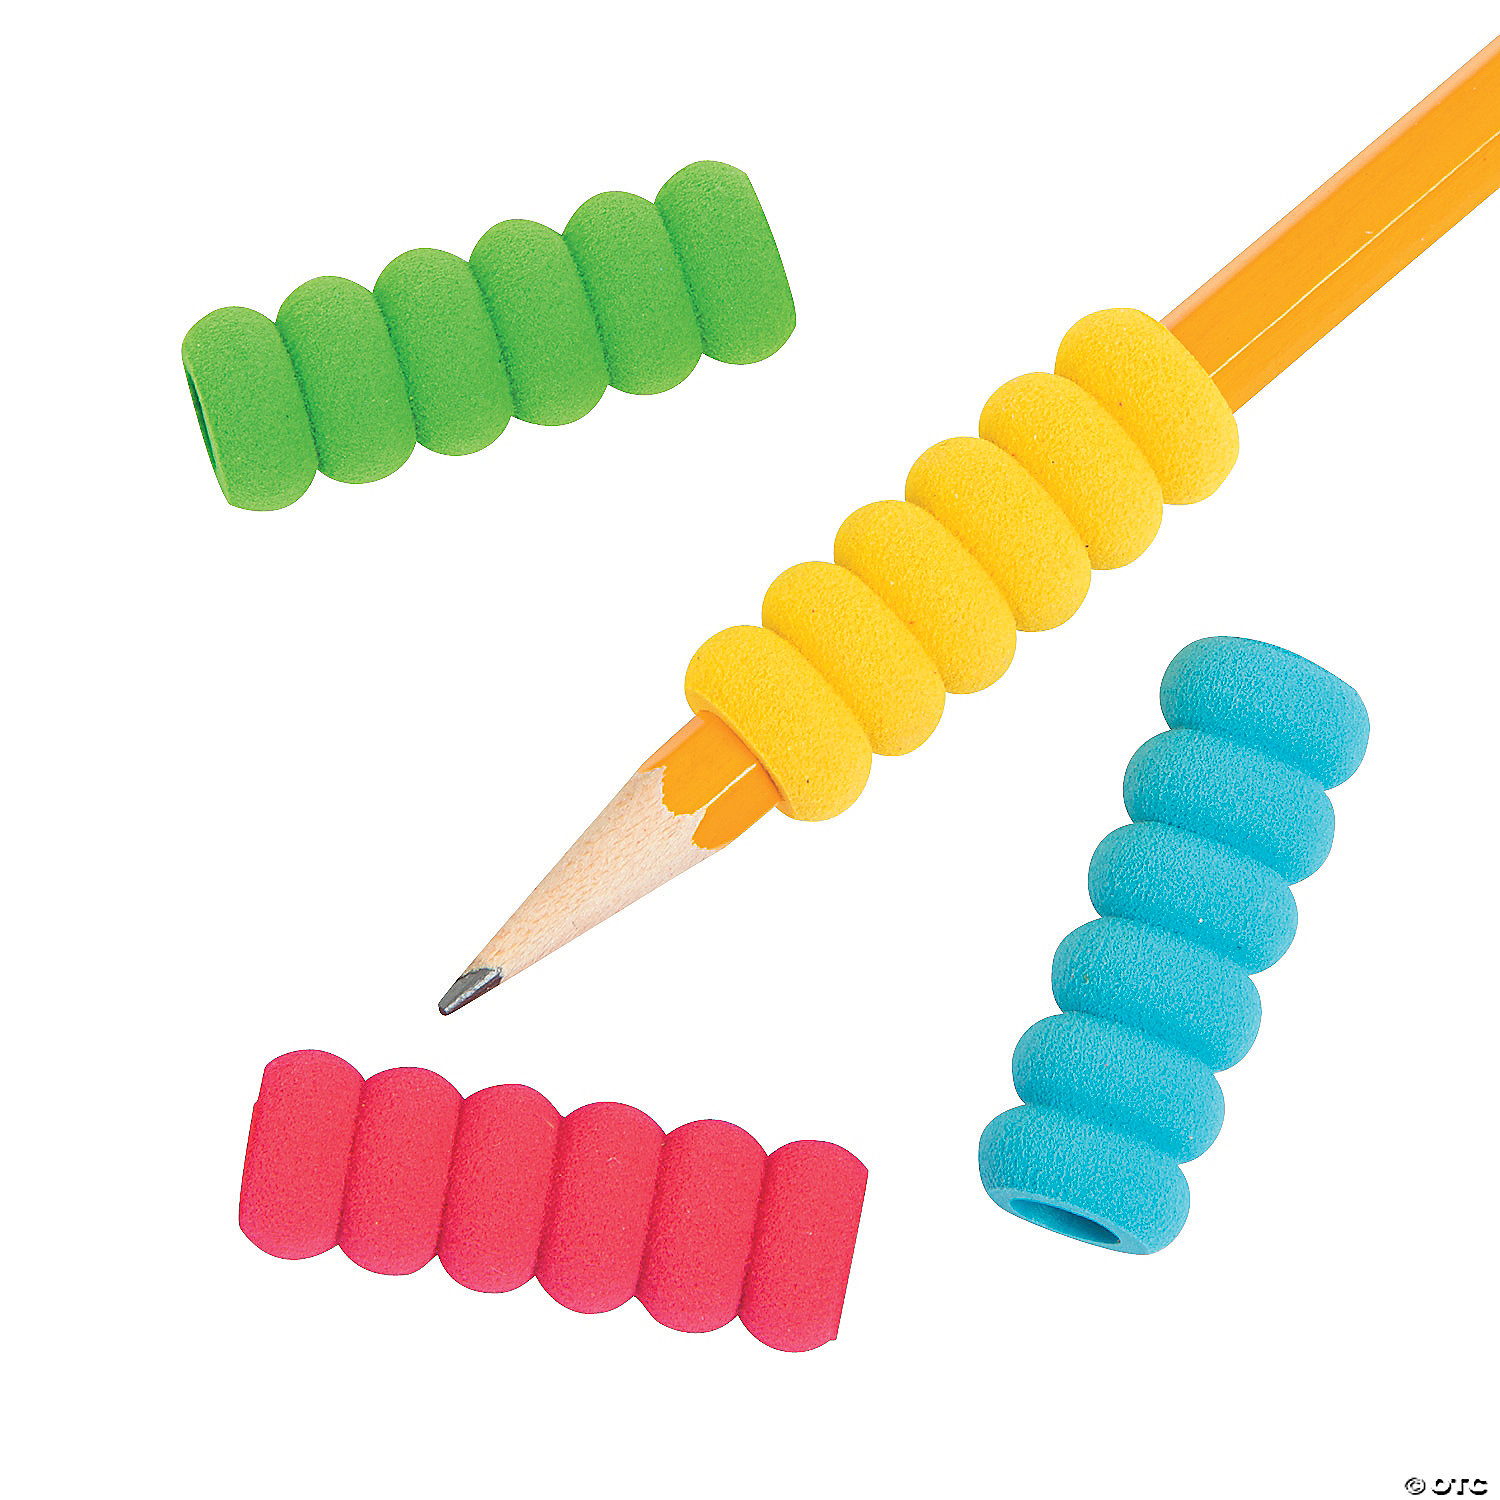 The Pencil Grip Textured Pop Beads 100 / Pack Assorted 9" X 3"3" tpg-965 